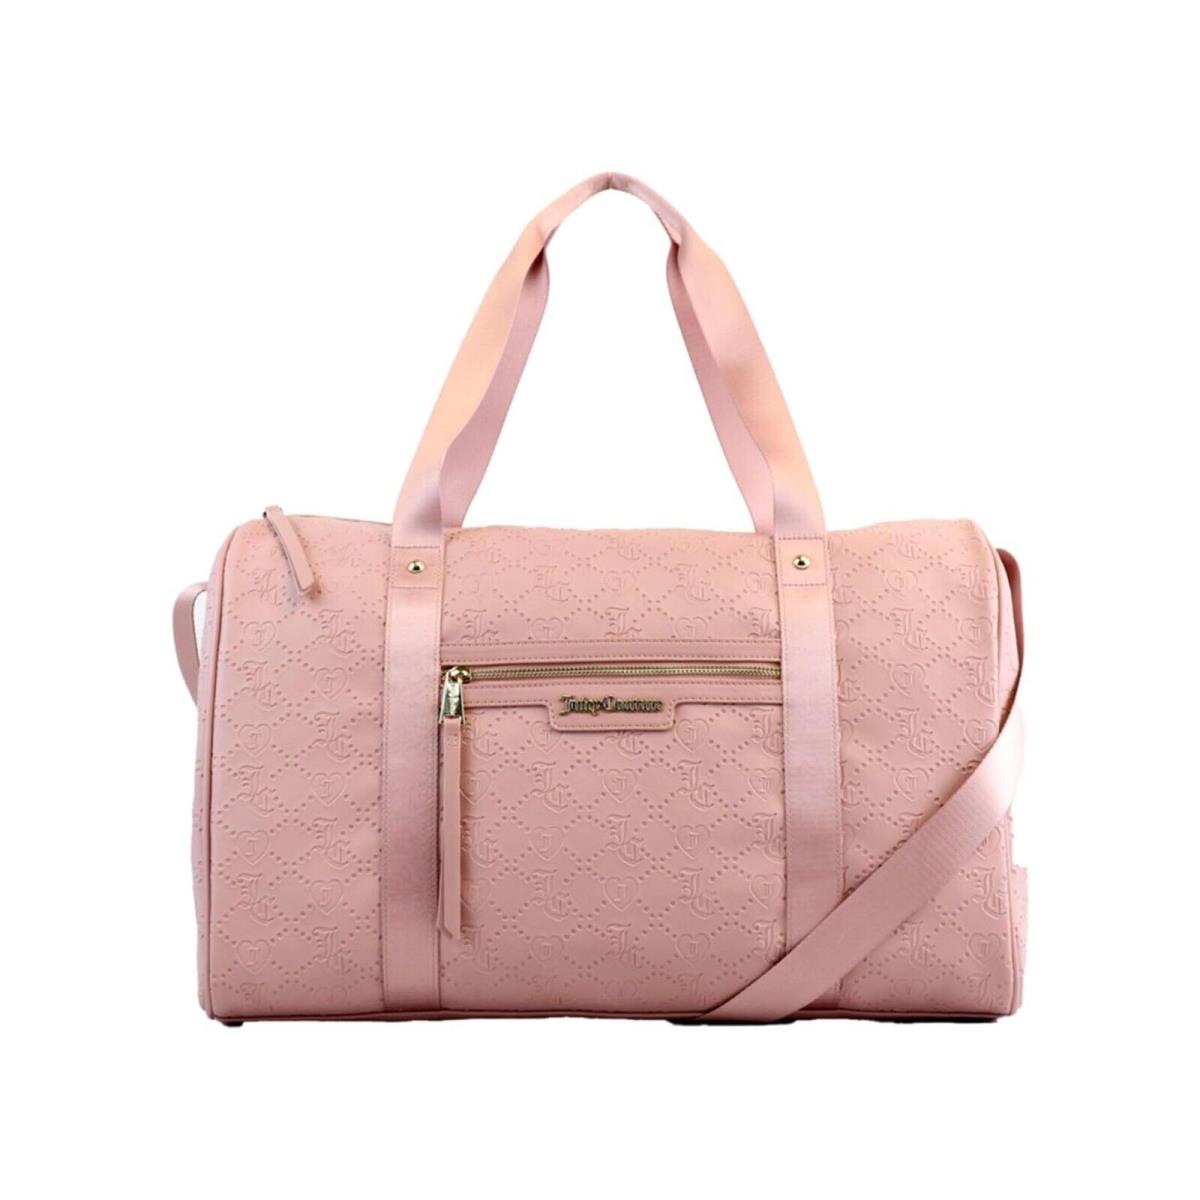 Juicy Couture Rosie Overnight Duffle Weekender Large Bag Dusty Blush JC Logo - Handle/Strap: Dusty Blush, Hardware: Gold, Exterior: Dusty Blush